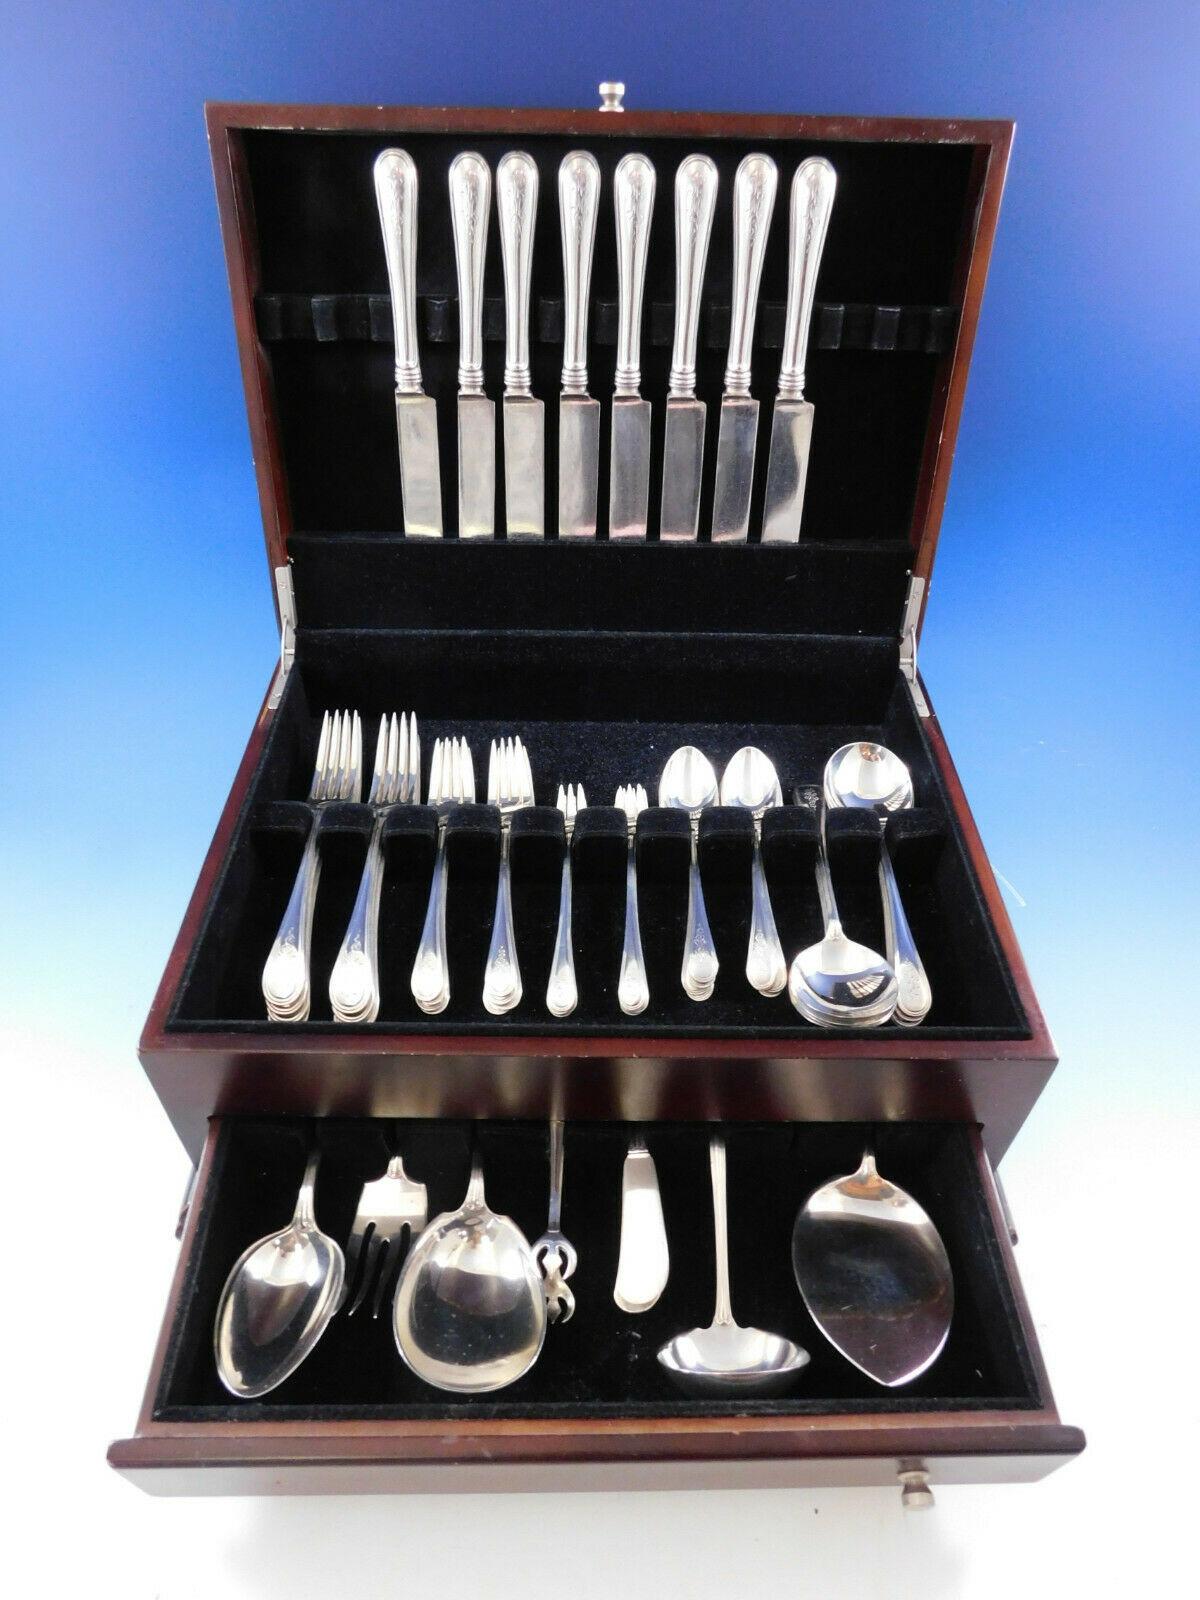 Scarce dinner size Hamilton by Gorham, circa 1909 sterling silver flatware set with Classic threaded design, 63 pieces. This set includes:

8 dinner size knives w/plated blunt blades, 9 1/2